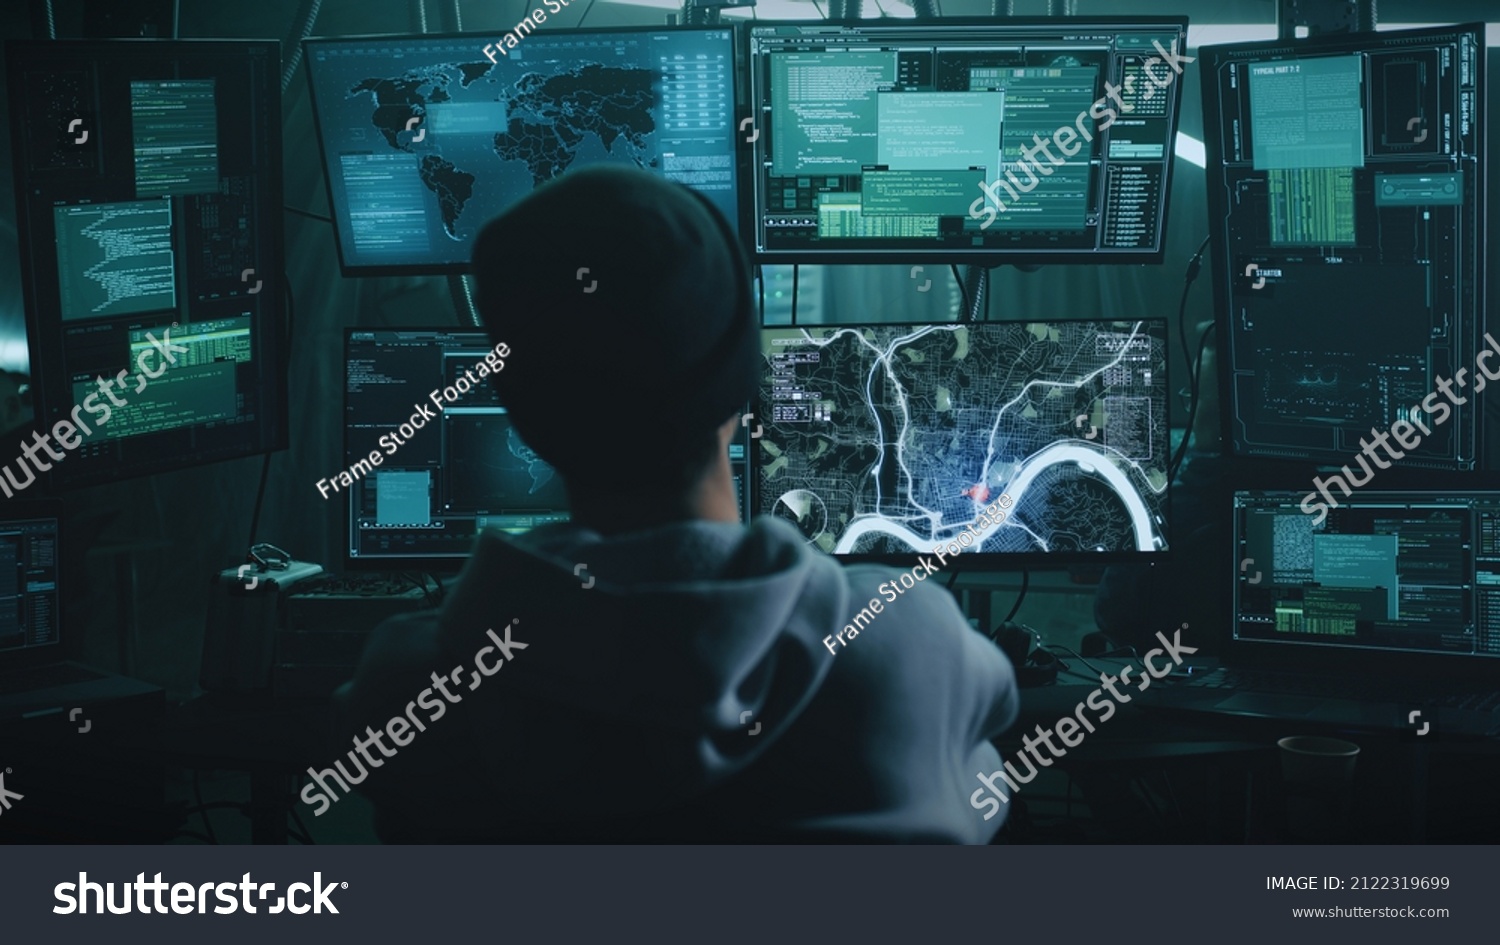 Teenage hacker with glasses watching a car on a monitor and pressing a keyboard in a dark cybercriminal hideout with lamps during a cyberattack #2122319699